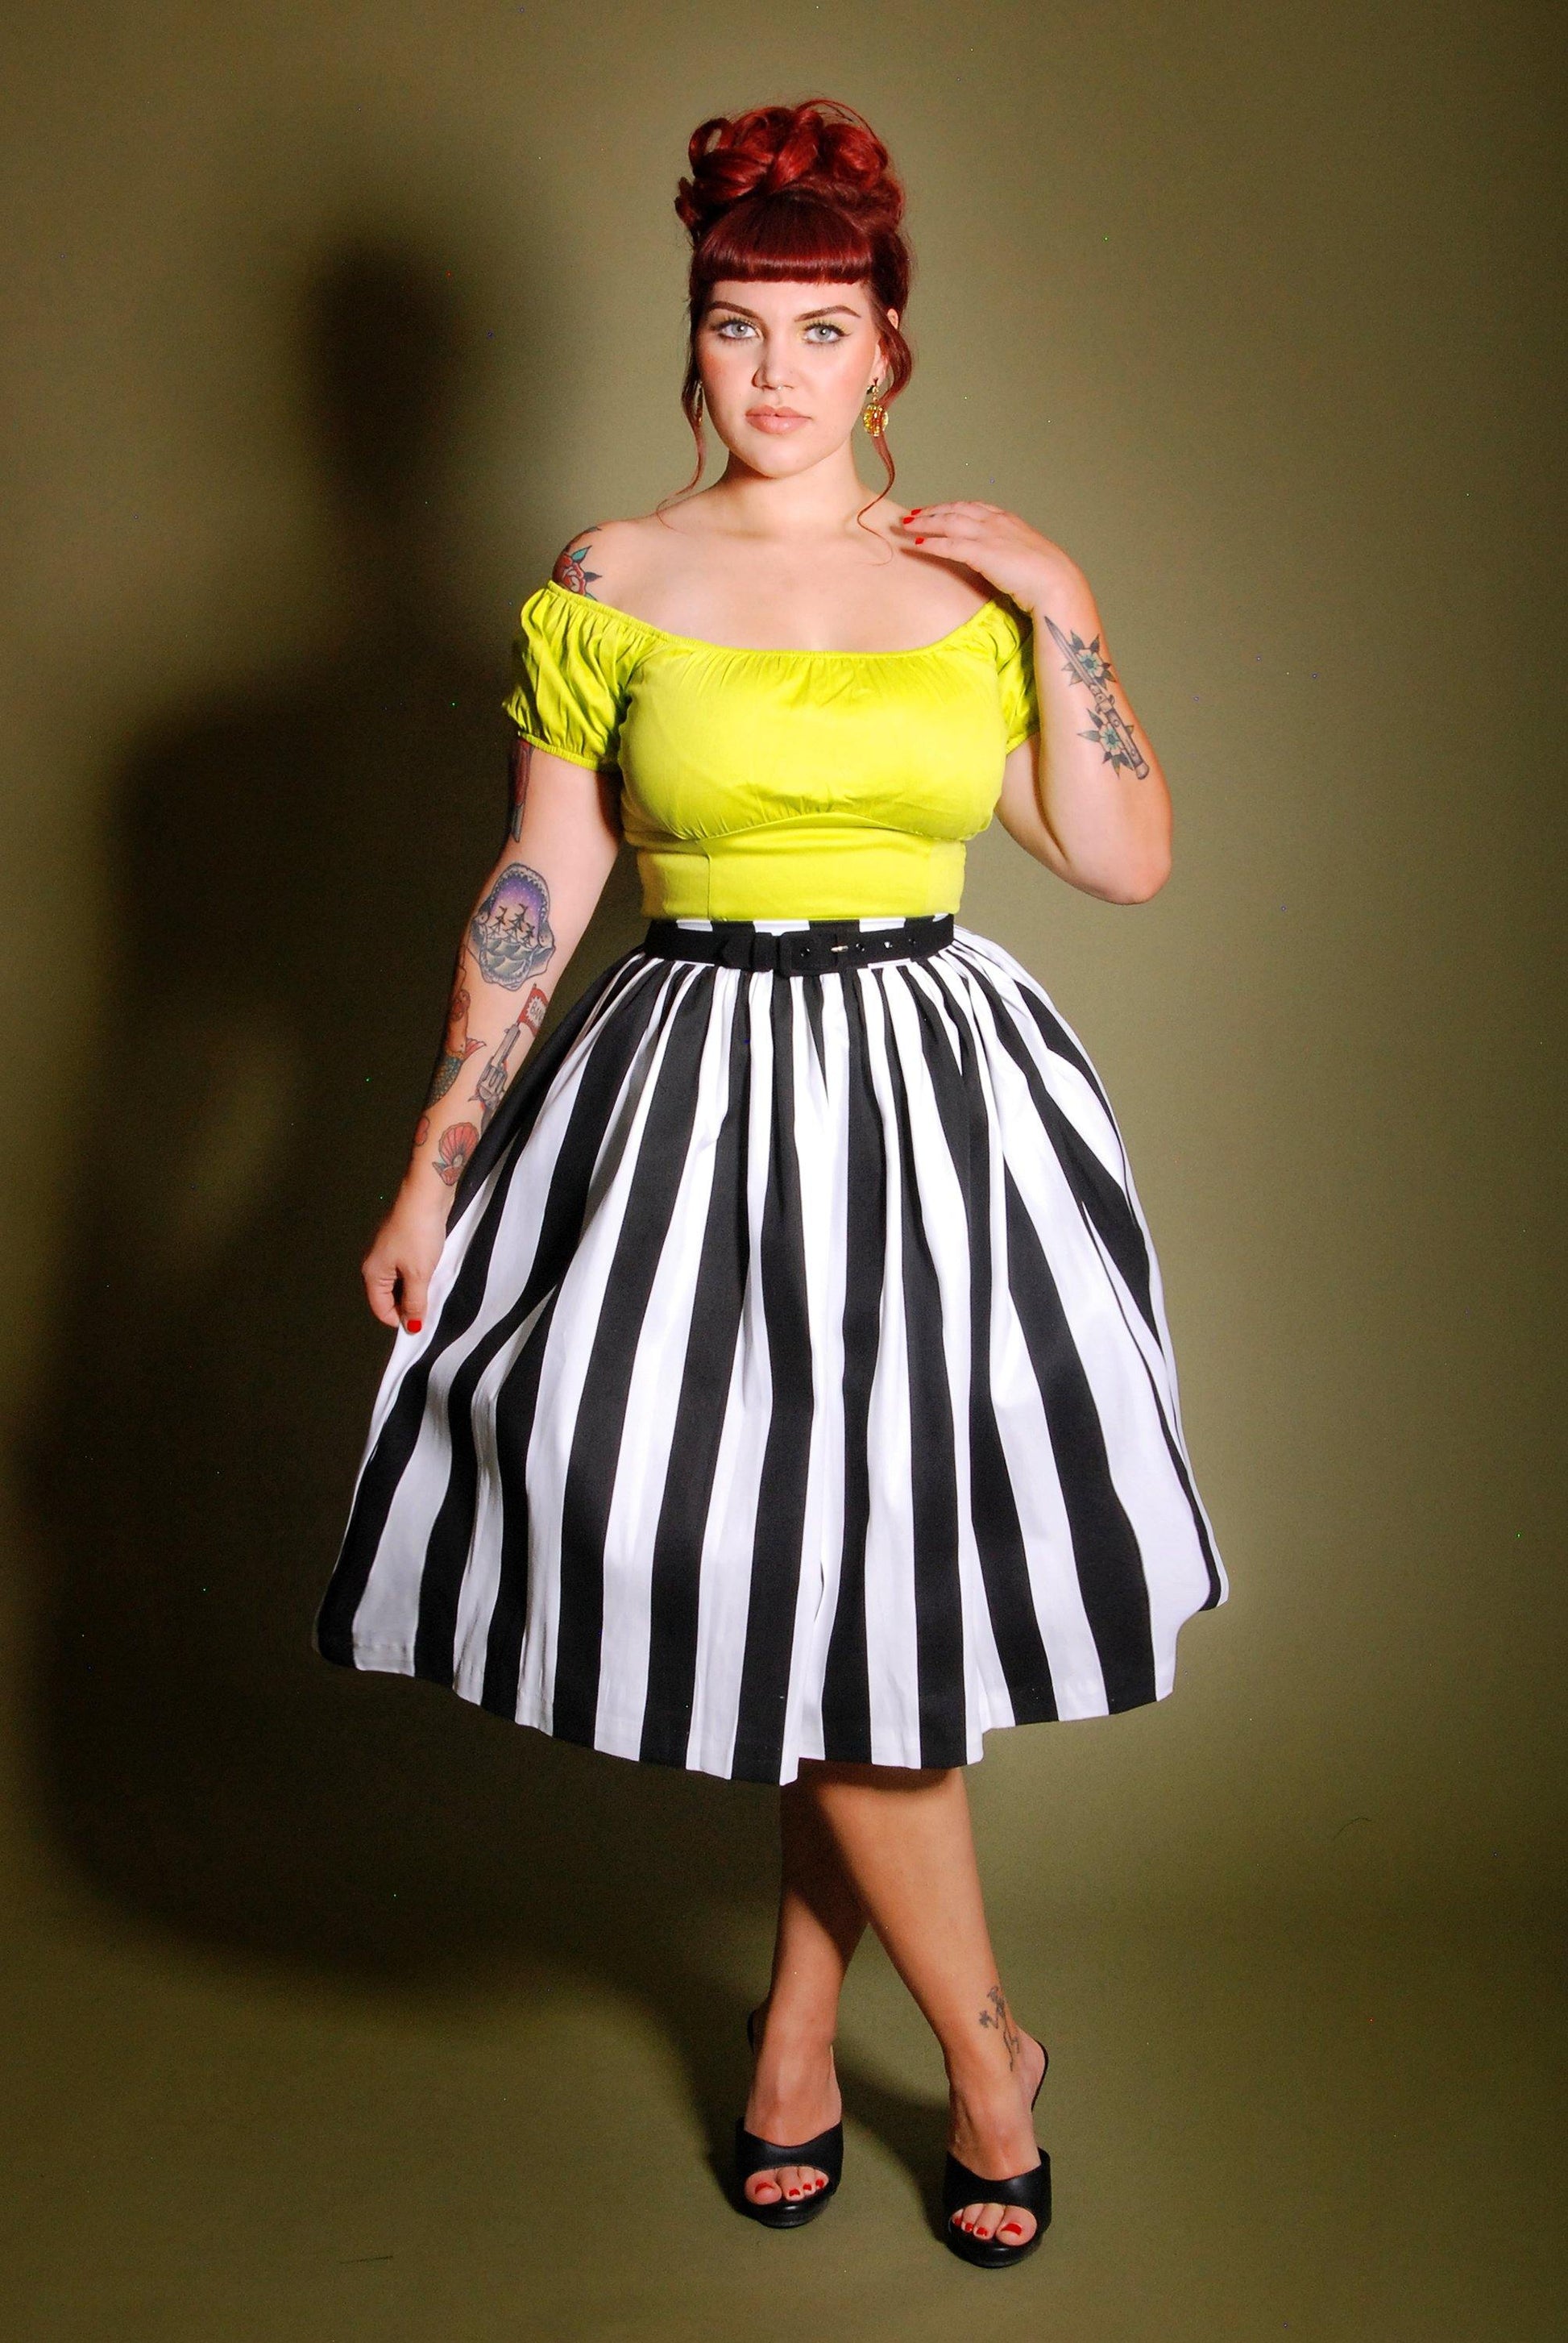 Bella Vintage Gathered Swing Skirt in Black and White Mark Stripe Cotton Sateen | Pinup Couture - pinupgirlclothing.com